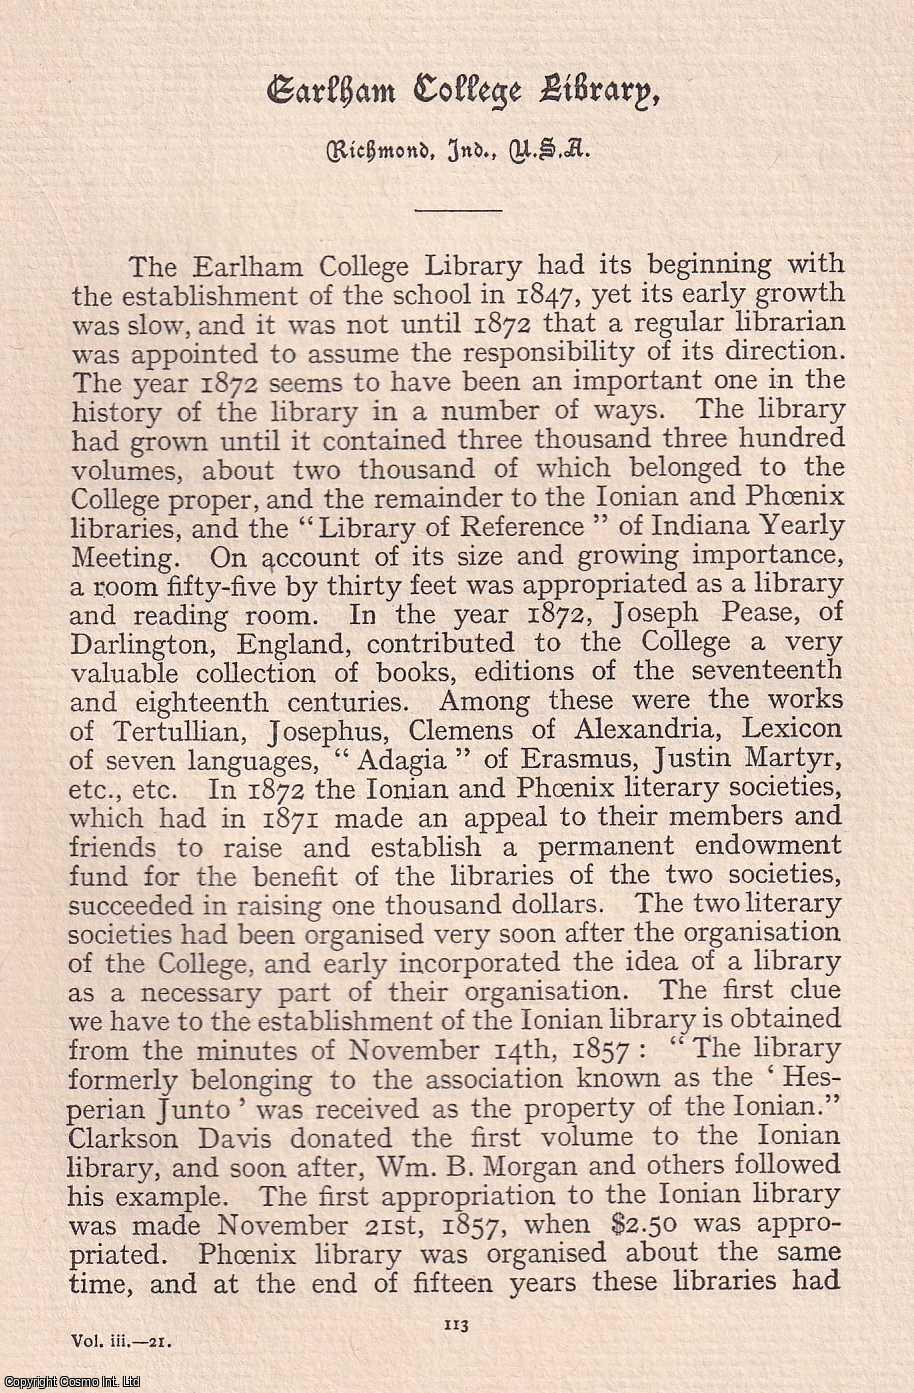 Harlow Lindley - Quakers: Earlham College Library, Richmond, Indiana. An original article from the Journal of the Friends' Historical Society, 1906.